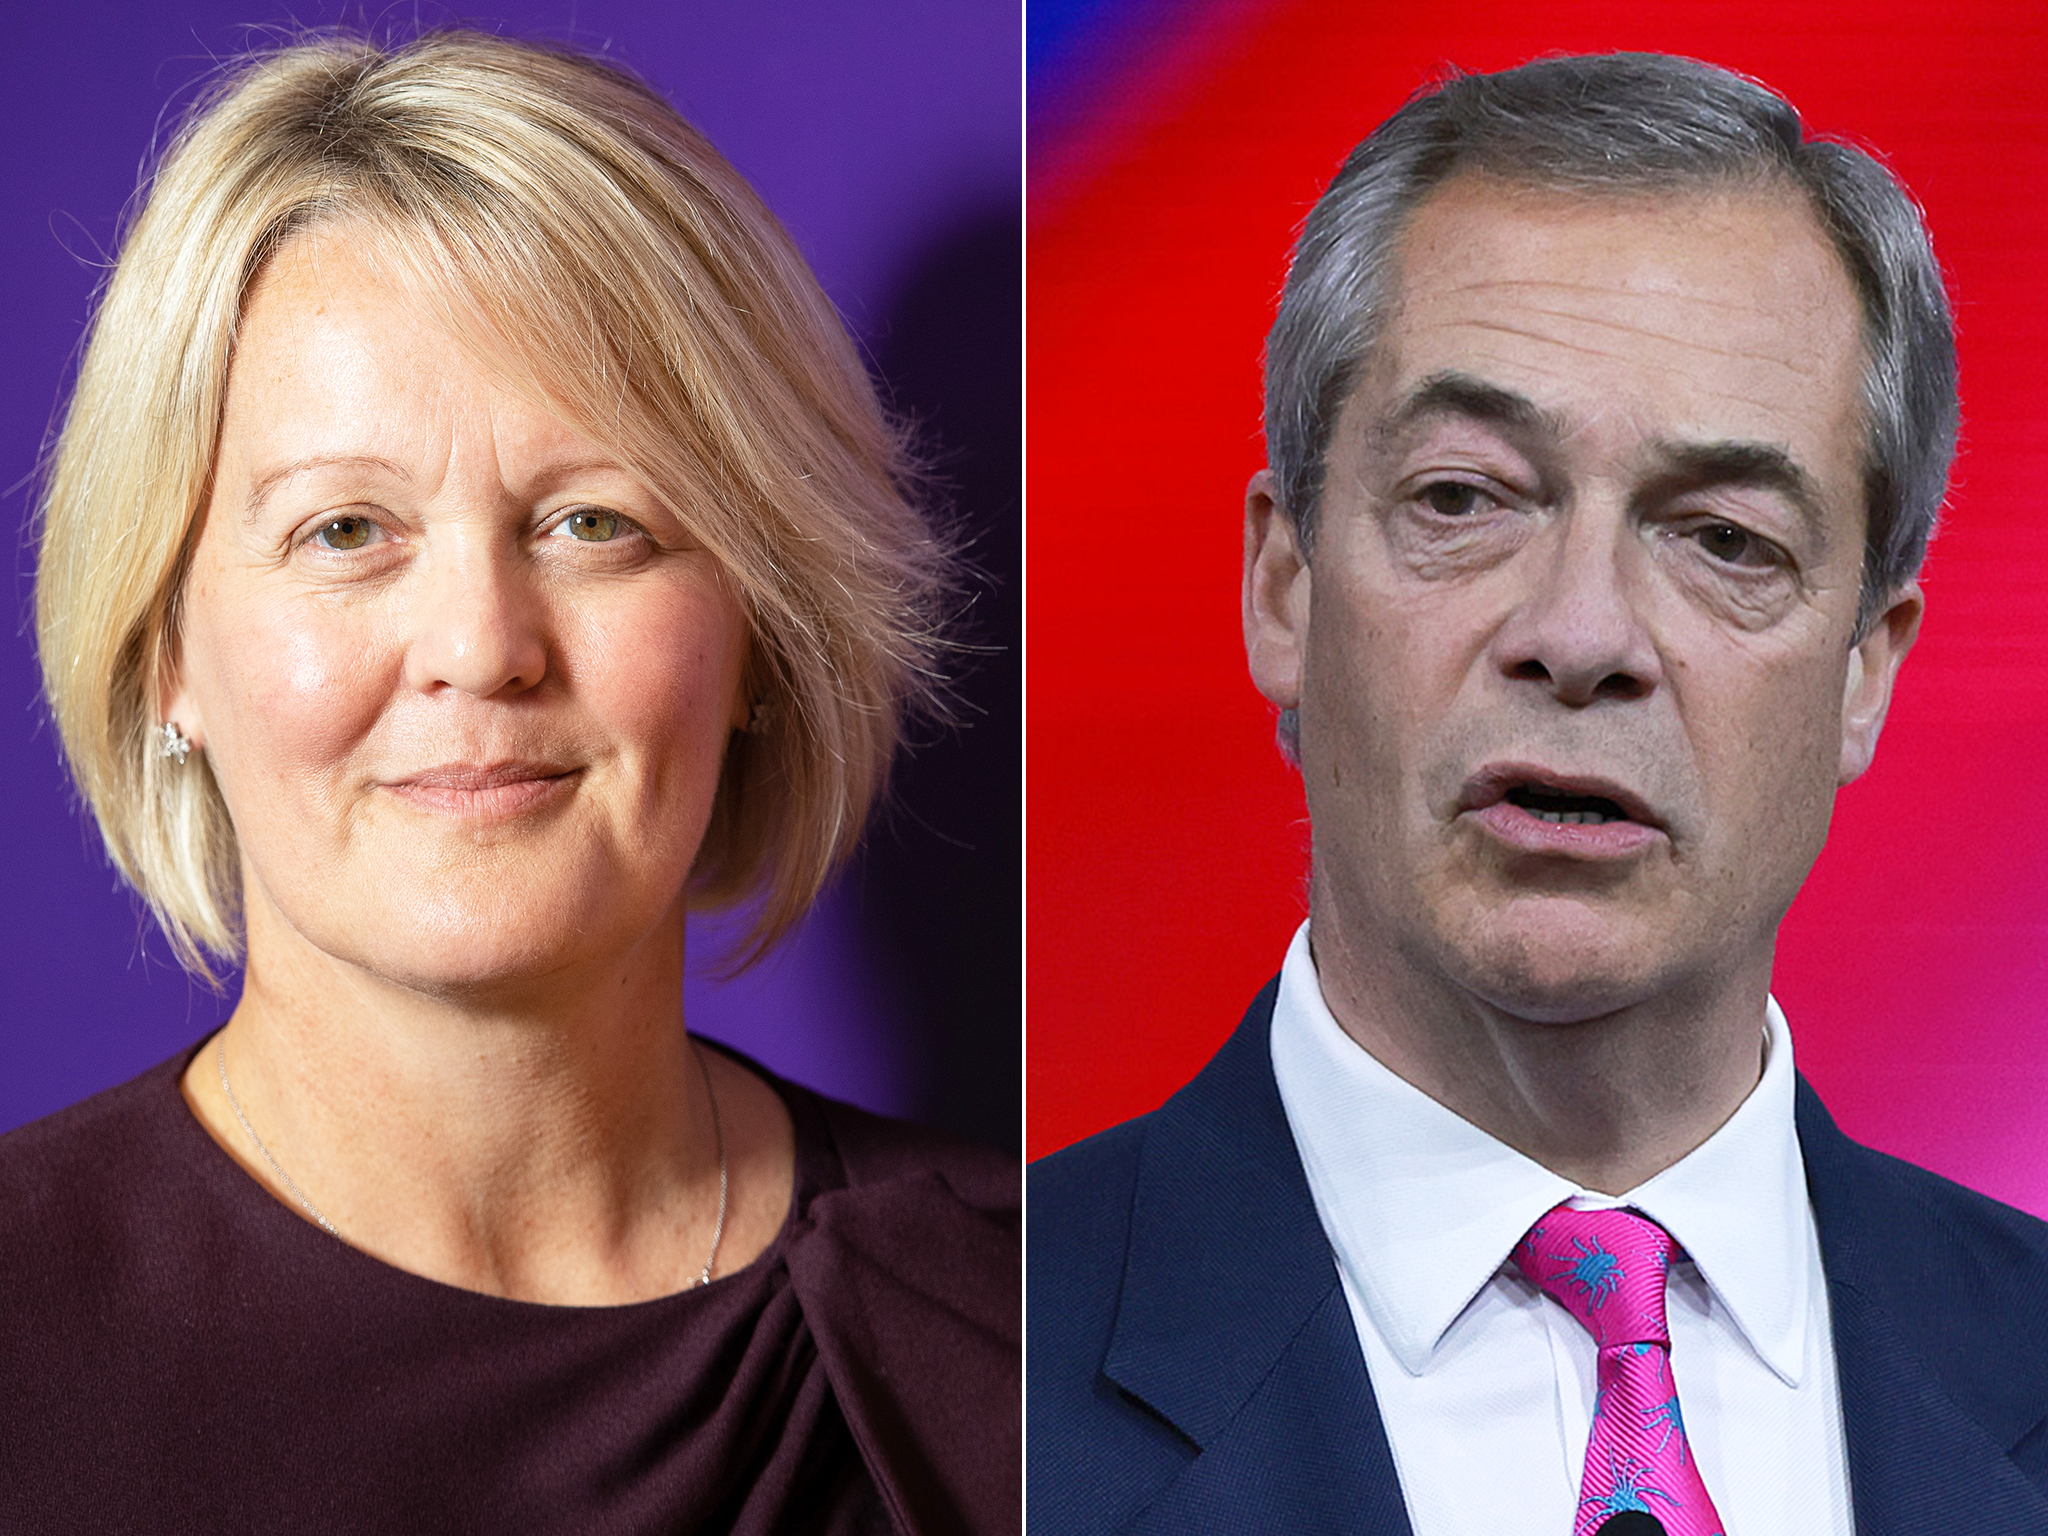 Alison Rose has apologised for divulging details about Nigel Farage holding an account with Coutts